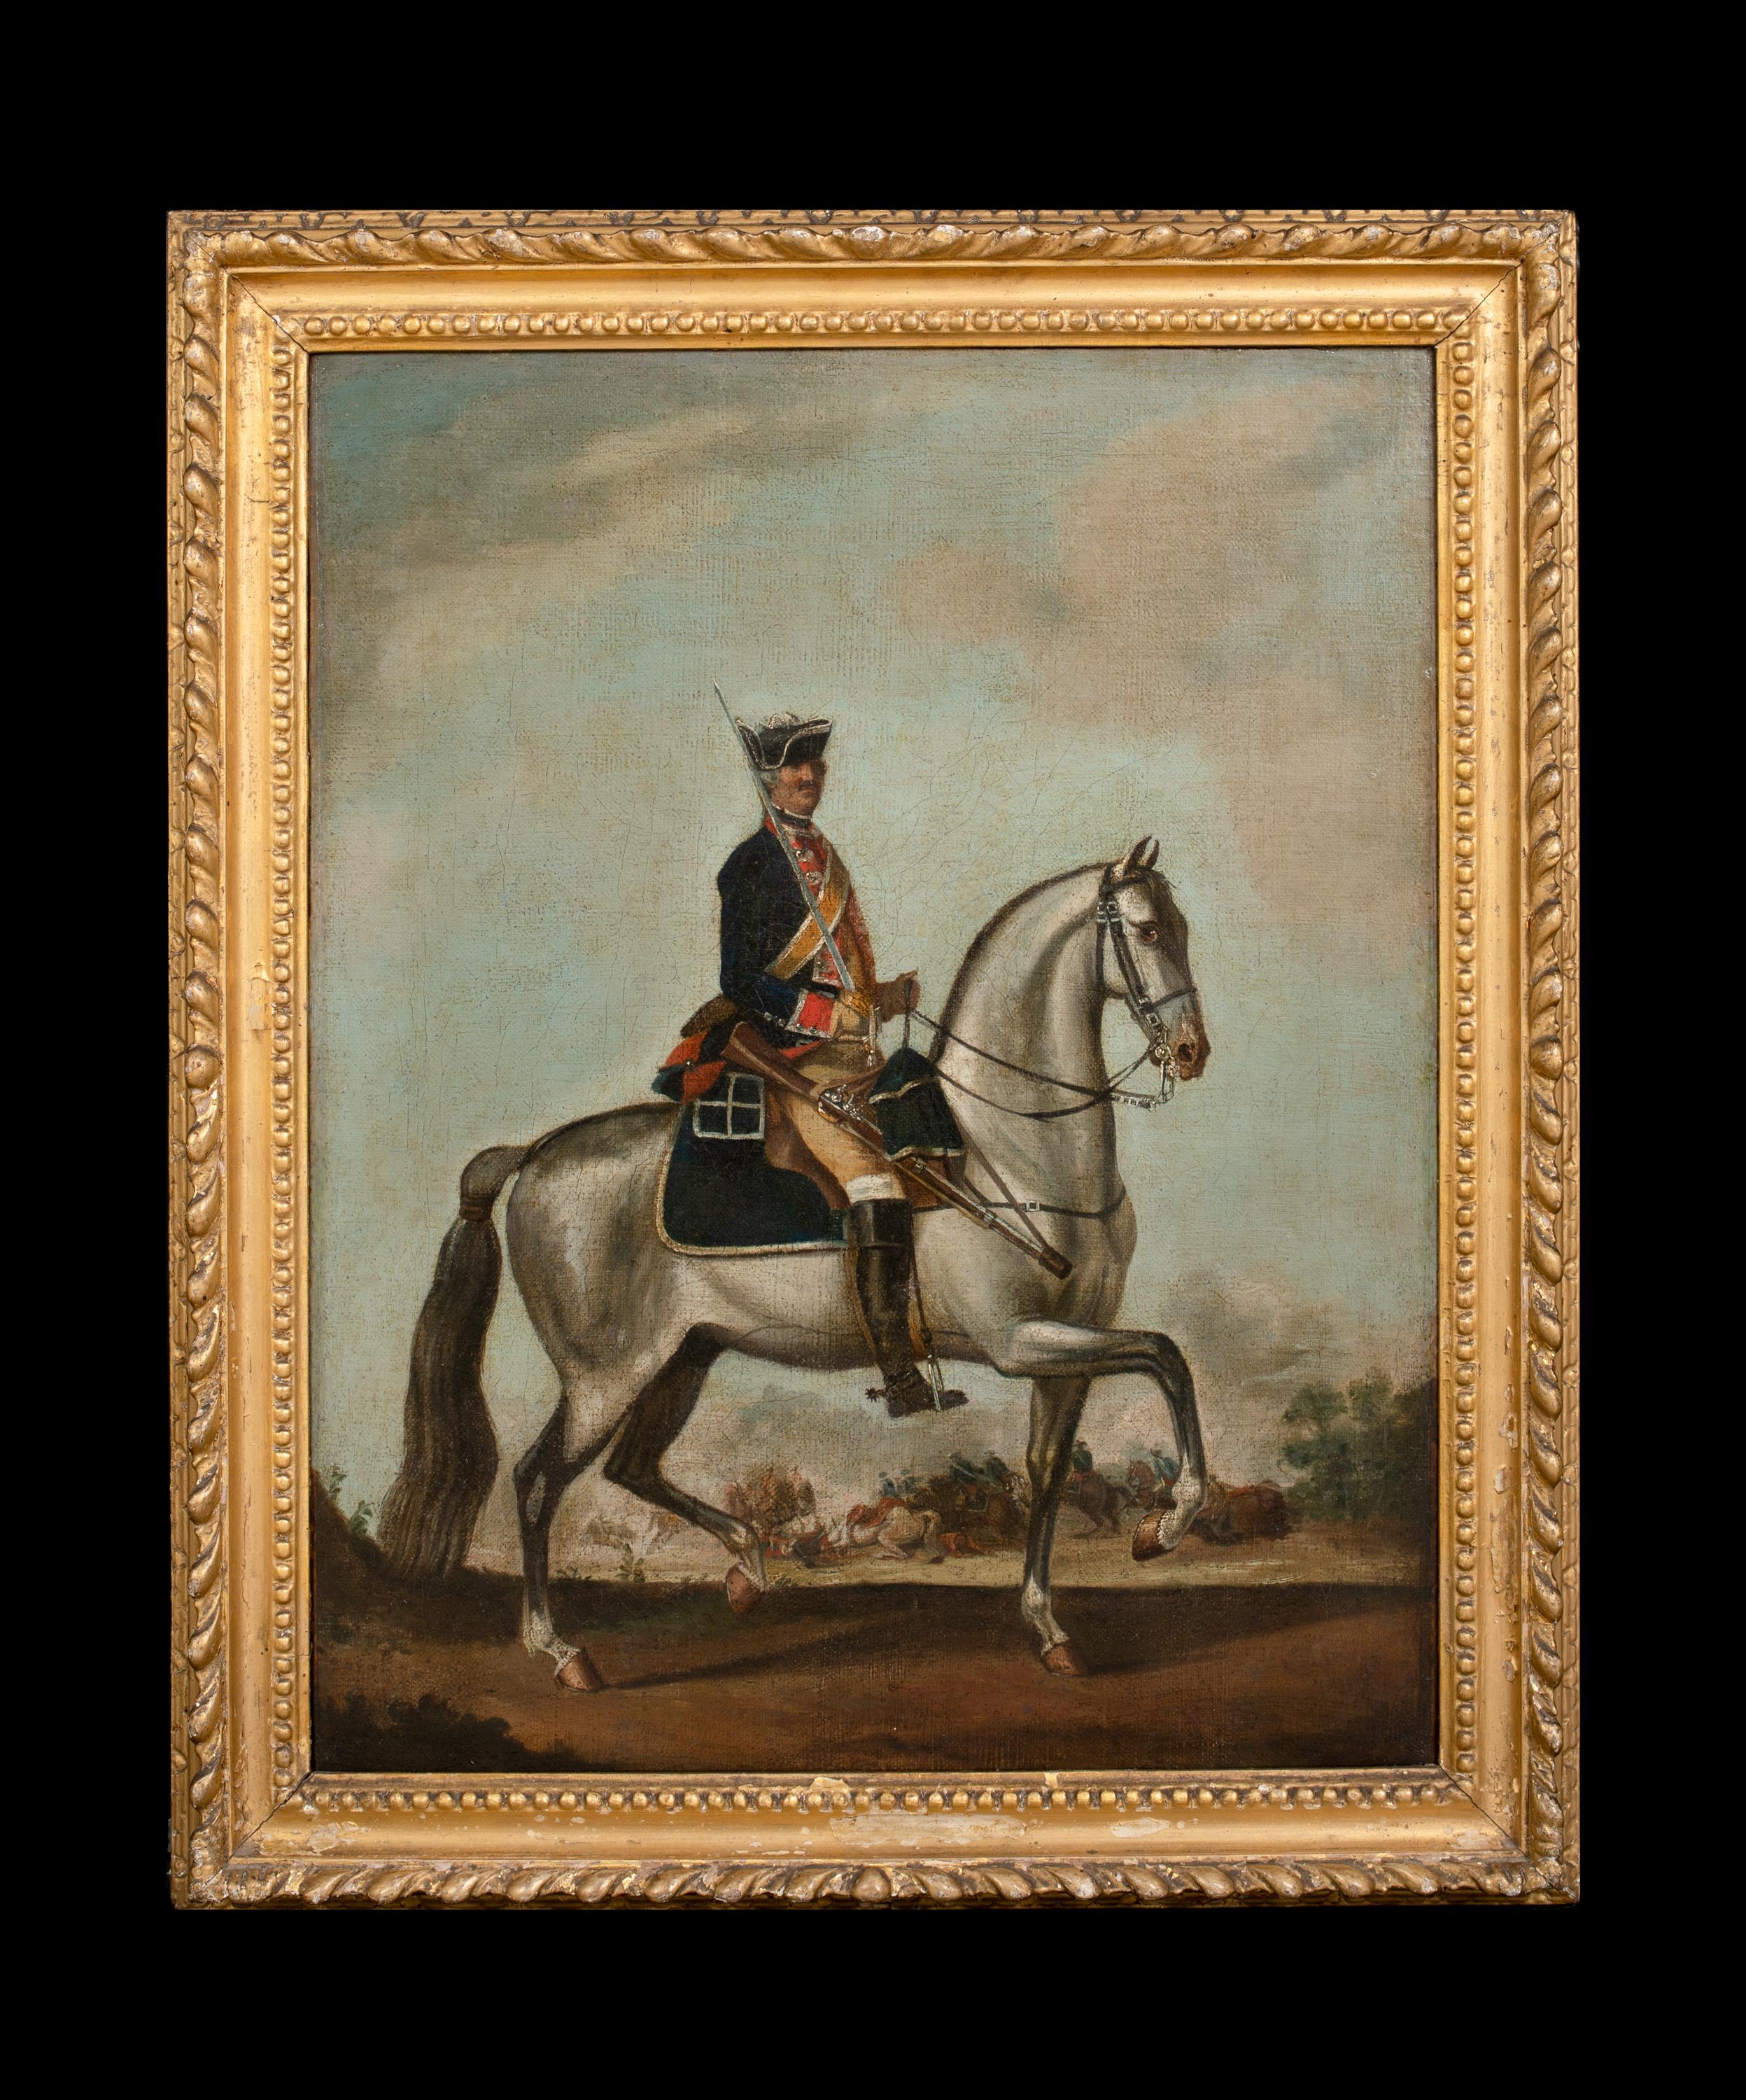 Officer & Horse Of The Royal Queens Dragoons, Seven Years War (1756-1763) - Painting by David Morier